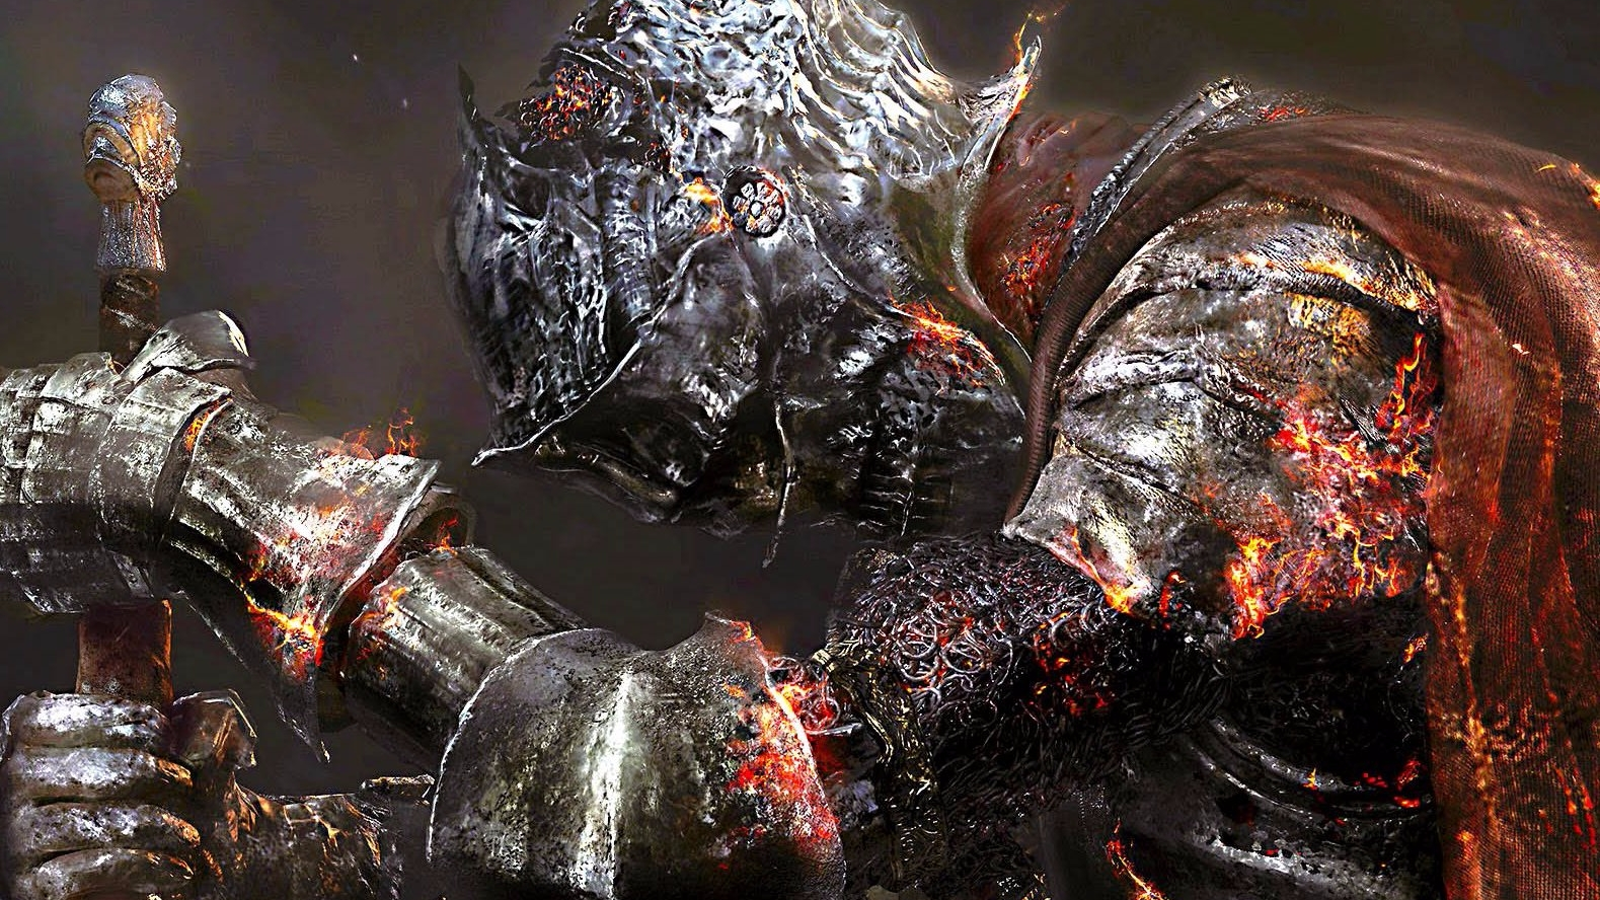 Digital Foundry: Hands-on with Dark Souls 3 